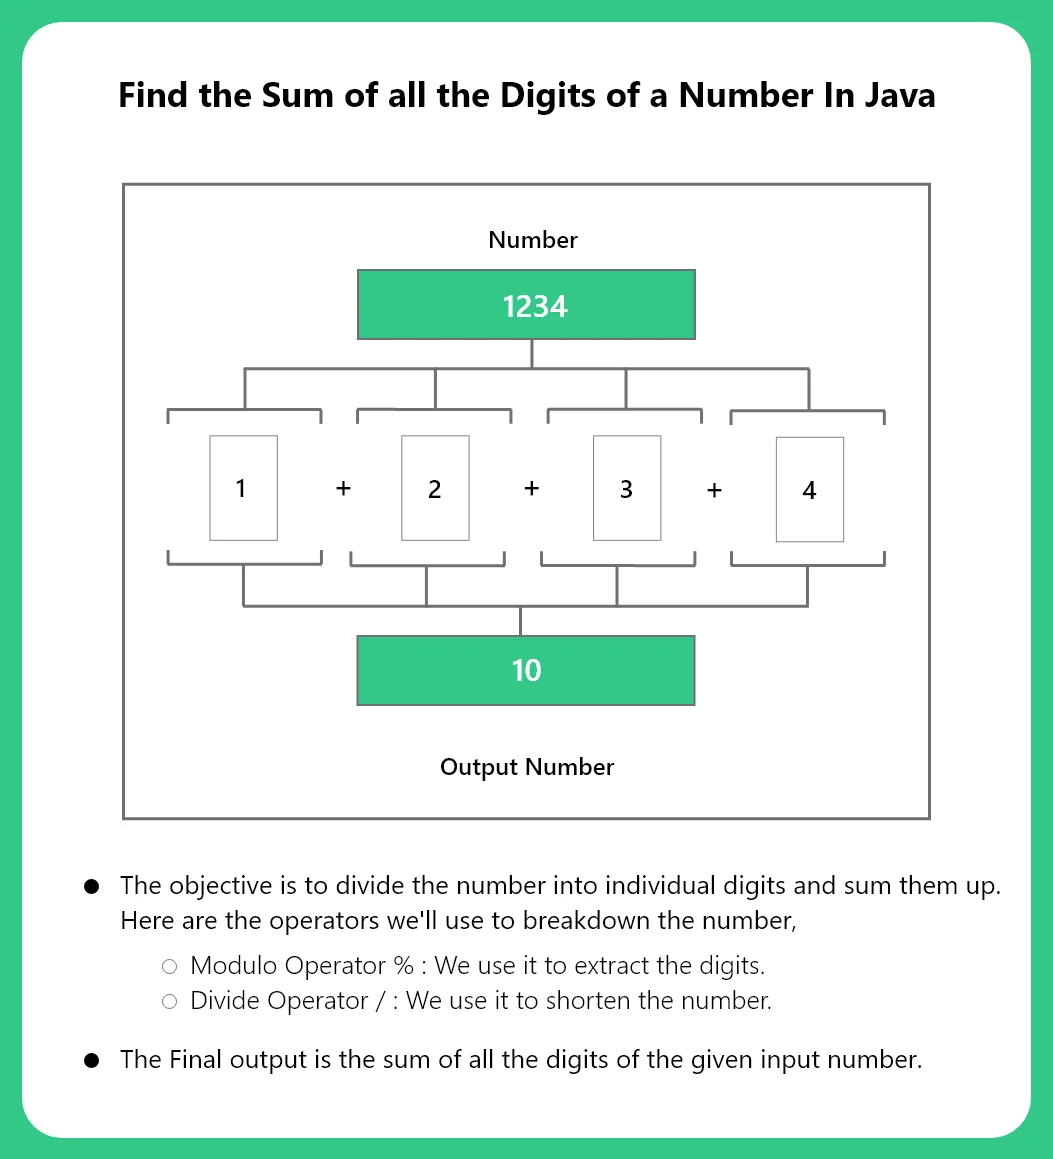 Find the Sum of the Digits of a Number in Java